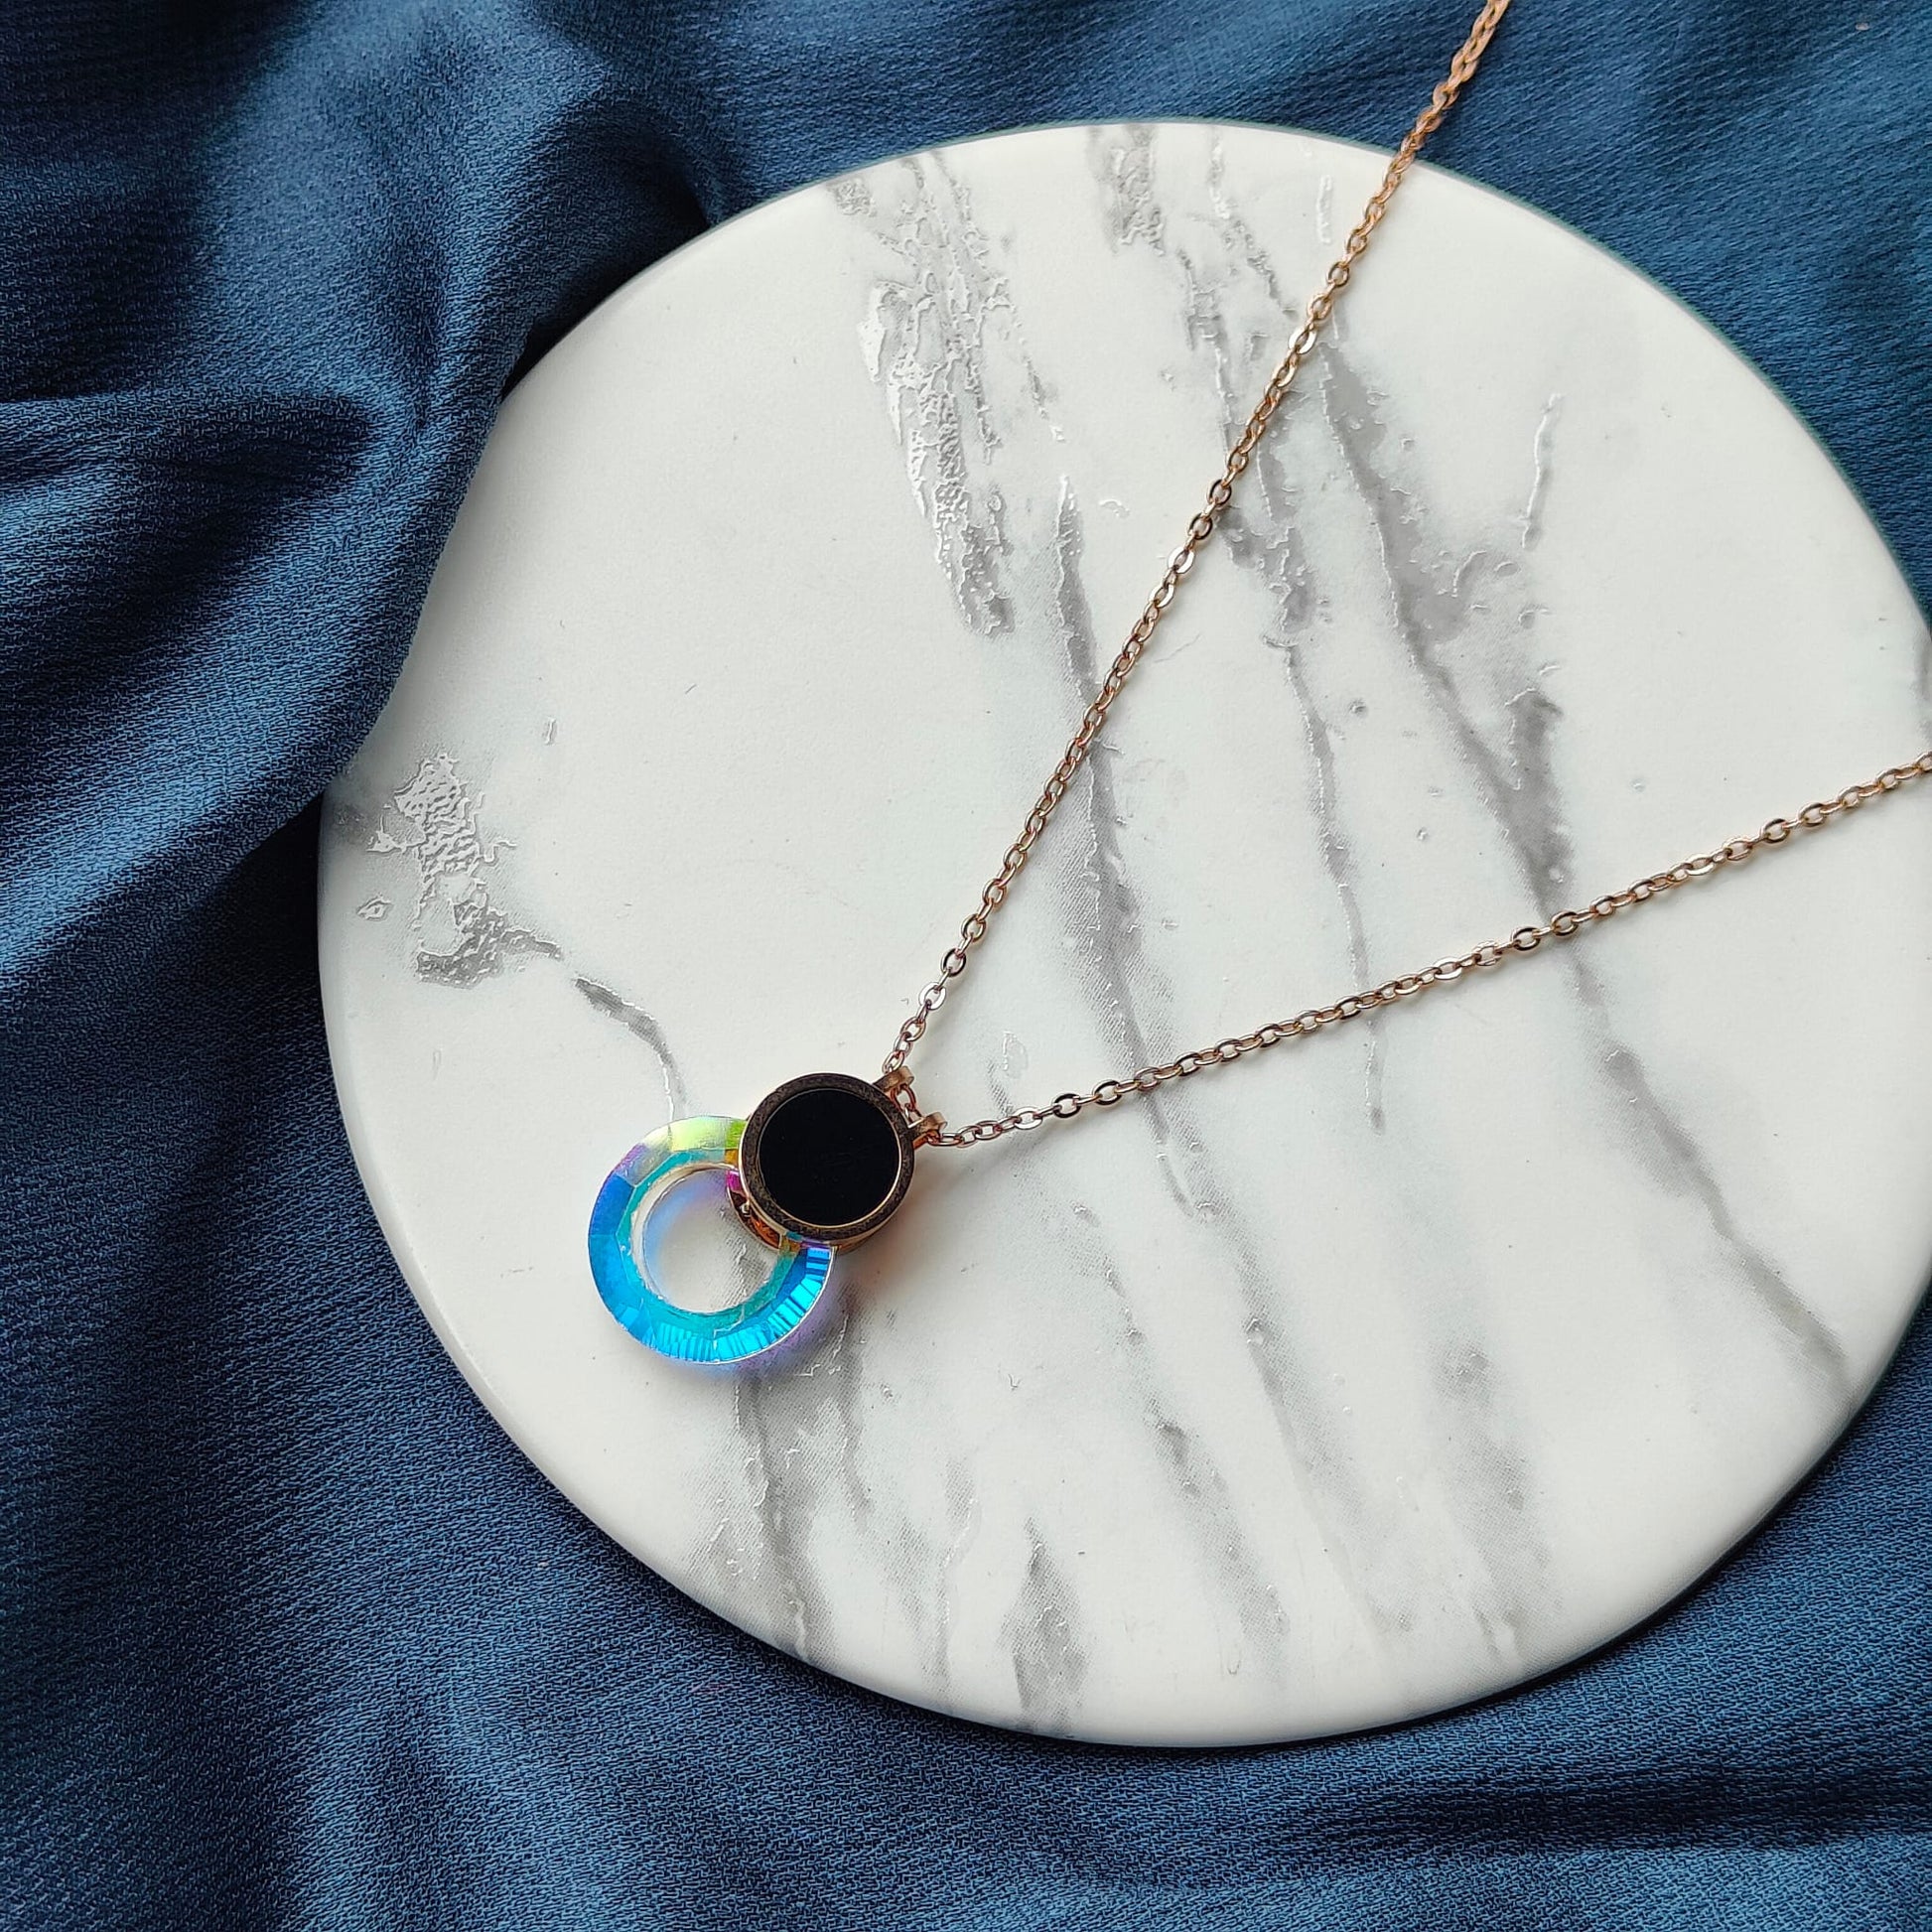 White Enamel Round Colourful Disc Gold Brass Pendant Necklace